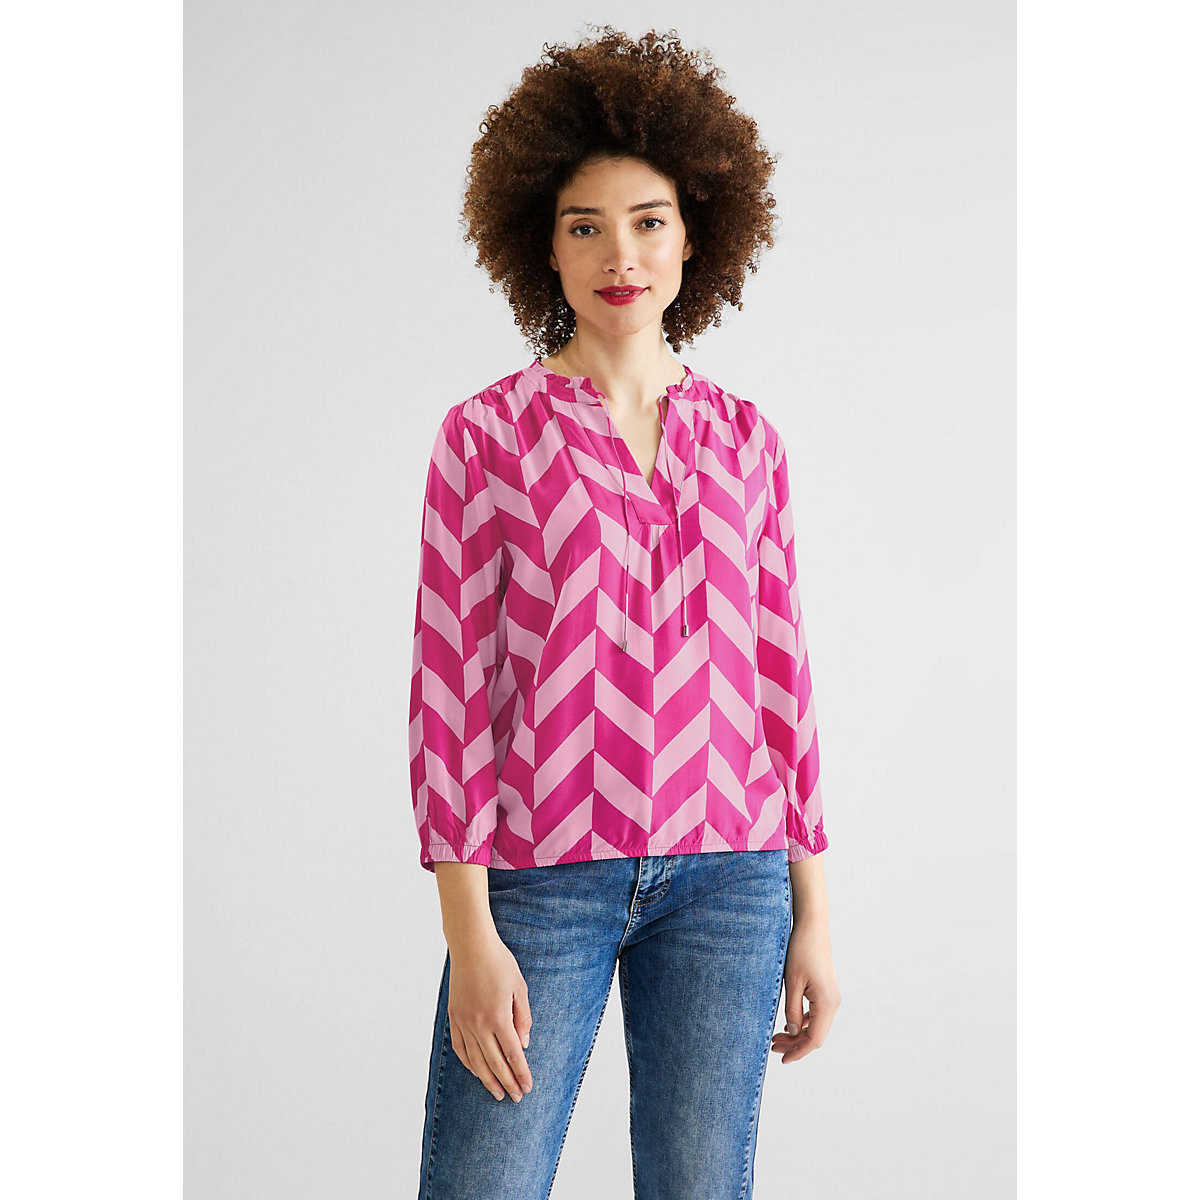 Street One Bluse mit Zick Zack Muster pink